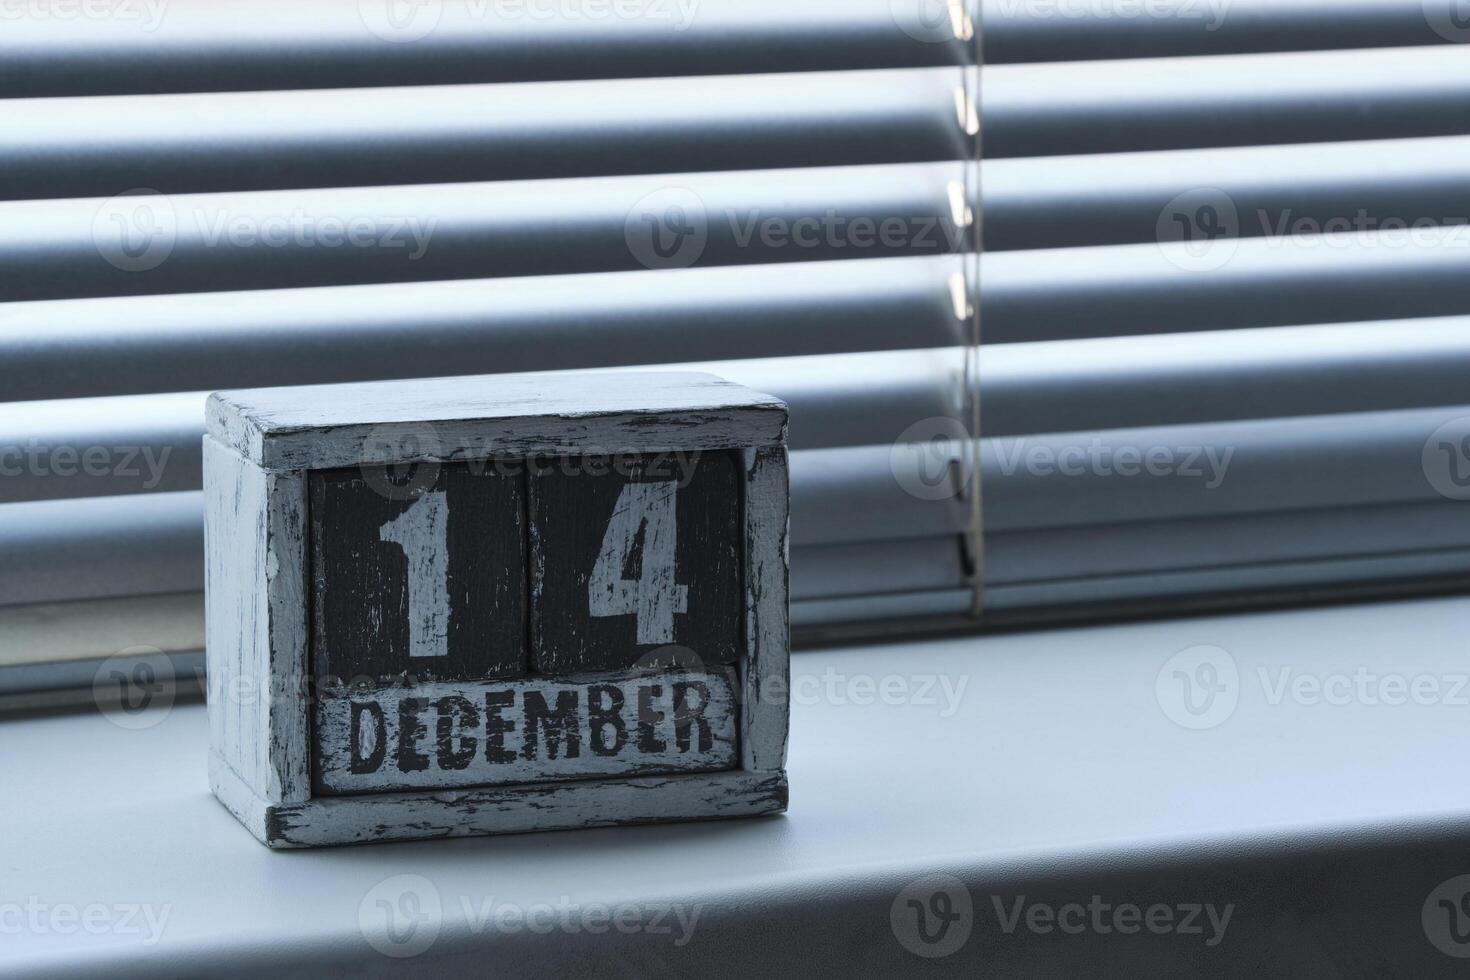 Morning December 14 on wooden calendar standing on window with blinds. photo